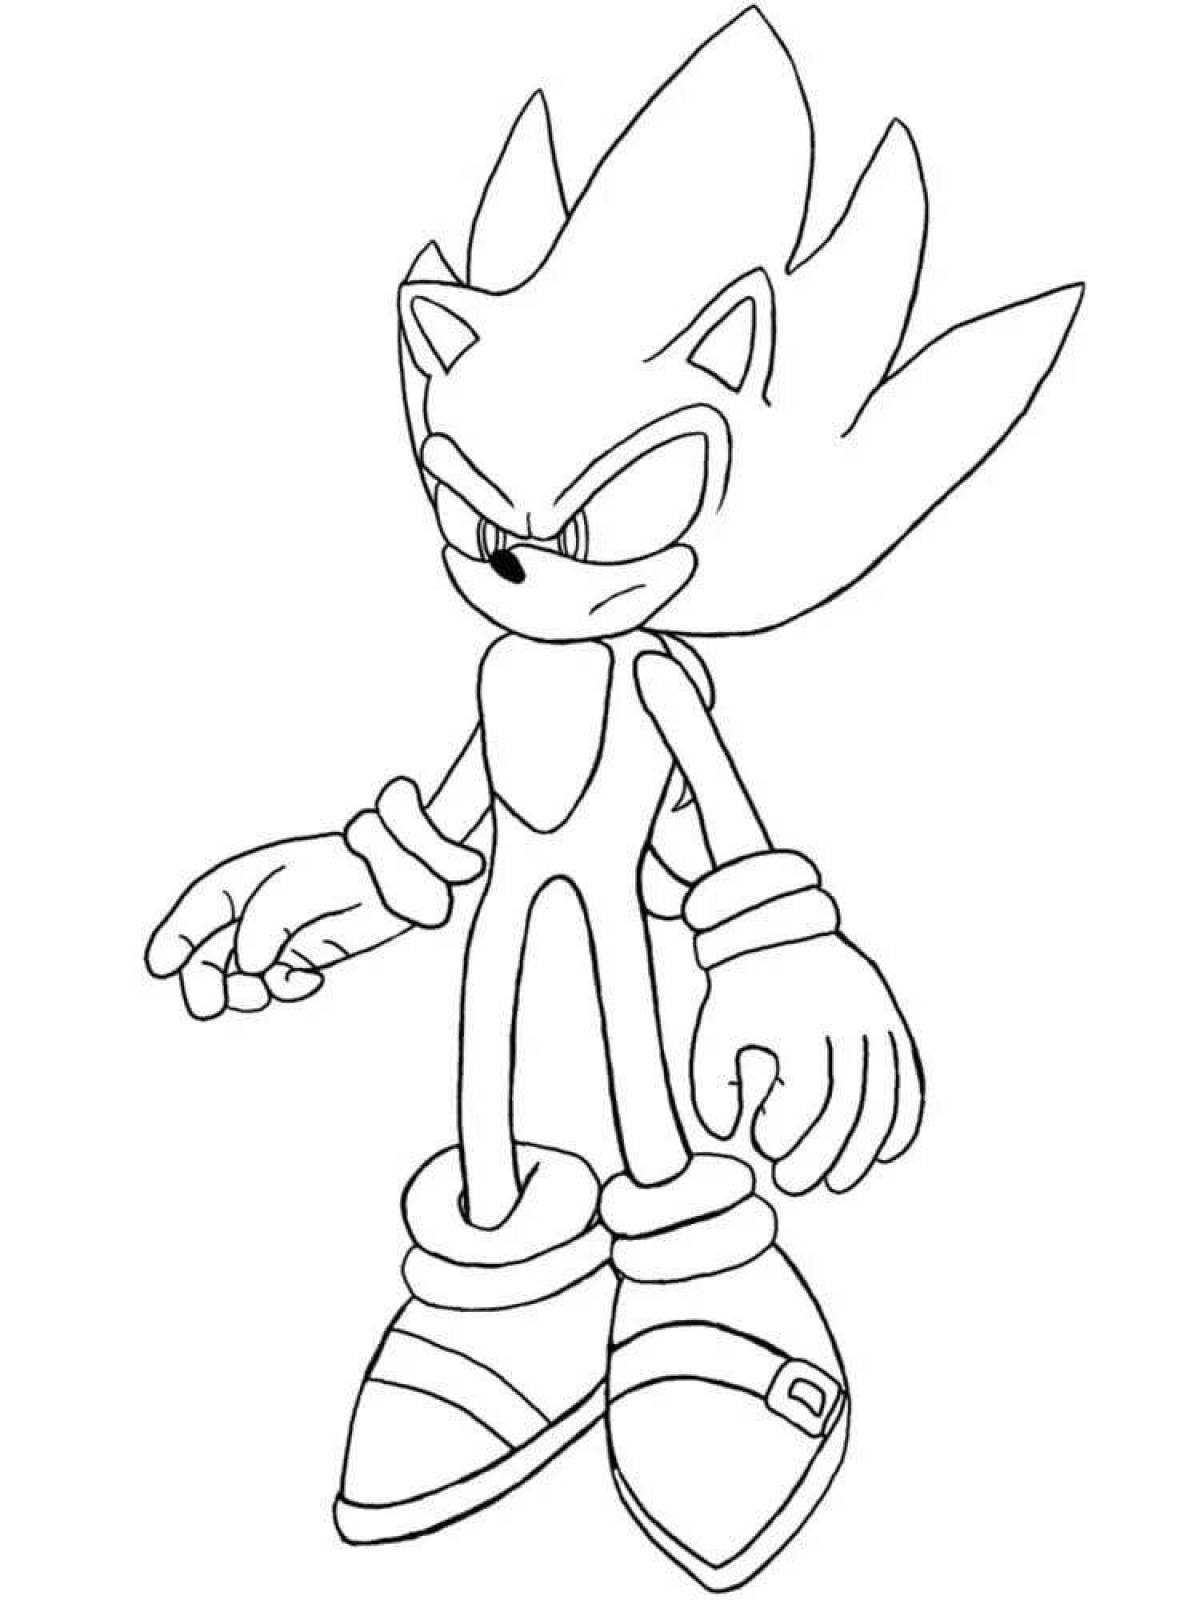 Charming sonic heroes coloring book